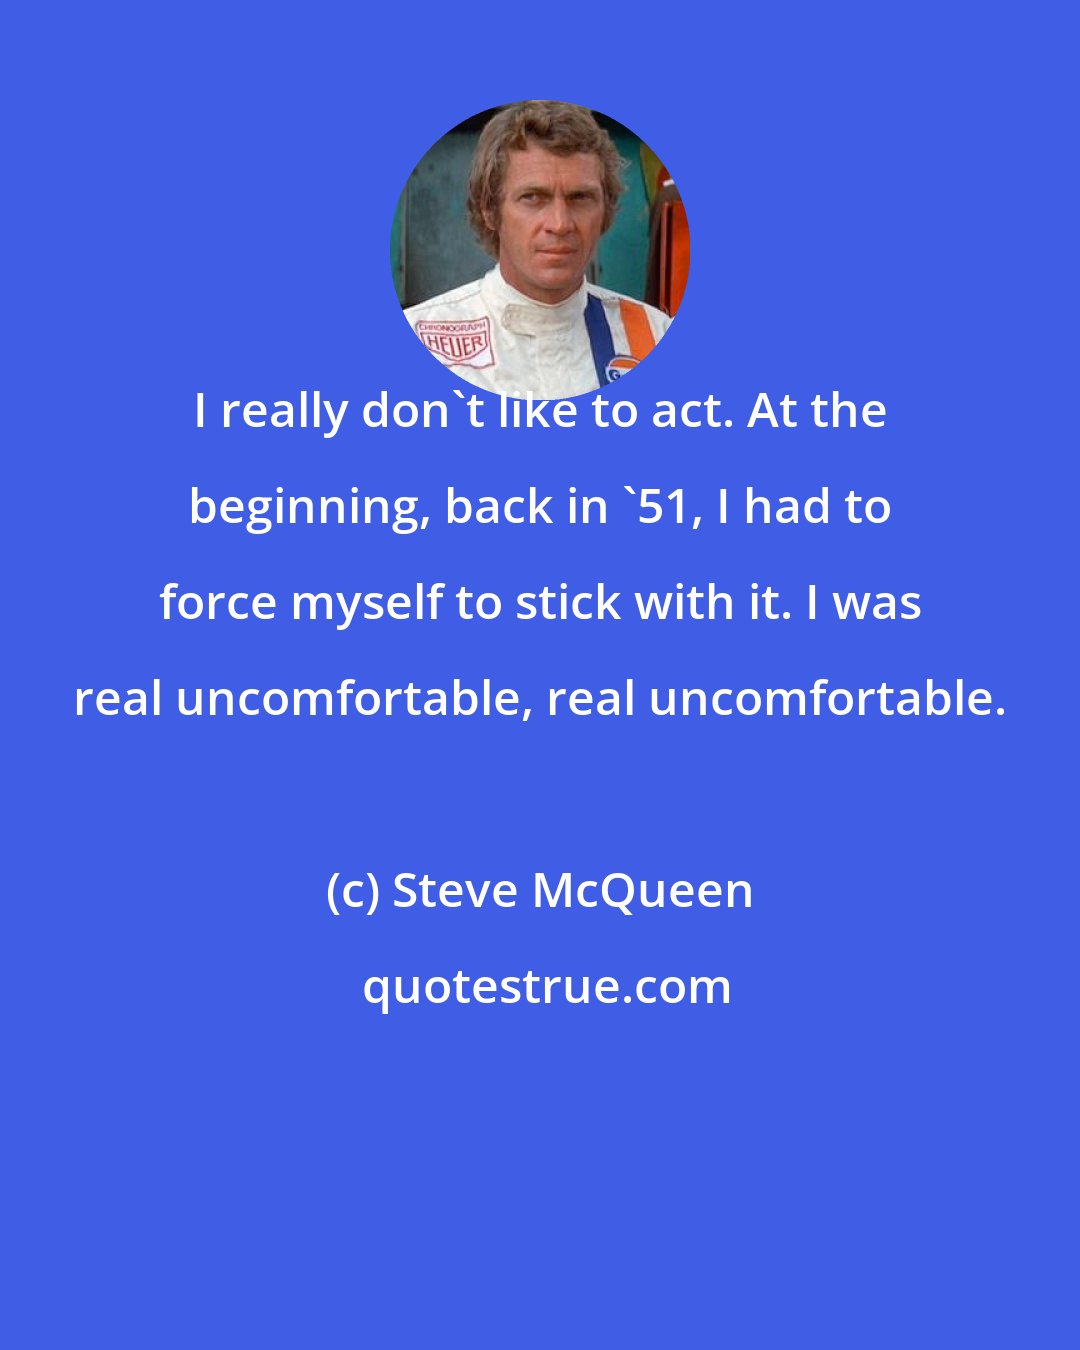 Steve McQueen: I really don't like to act. At the beginning, back in '51, I had to force myself to stick with it. I was real uncomfortable, real uncomfortable.